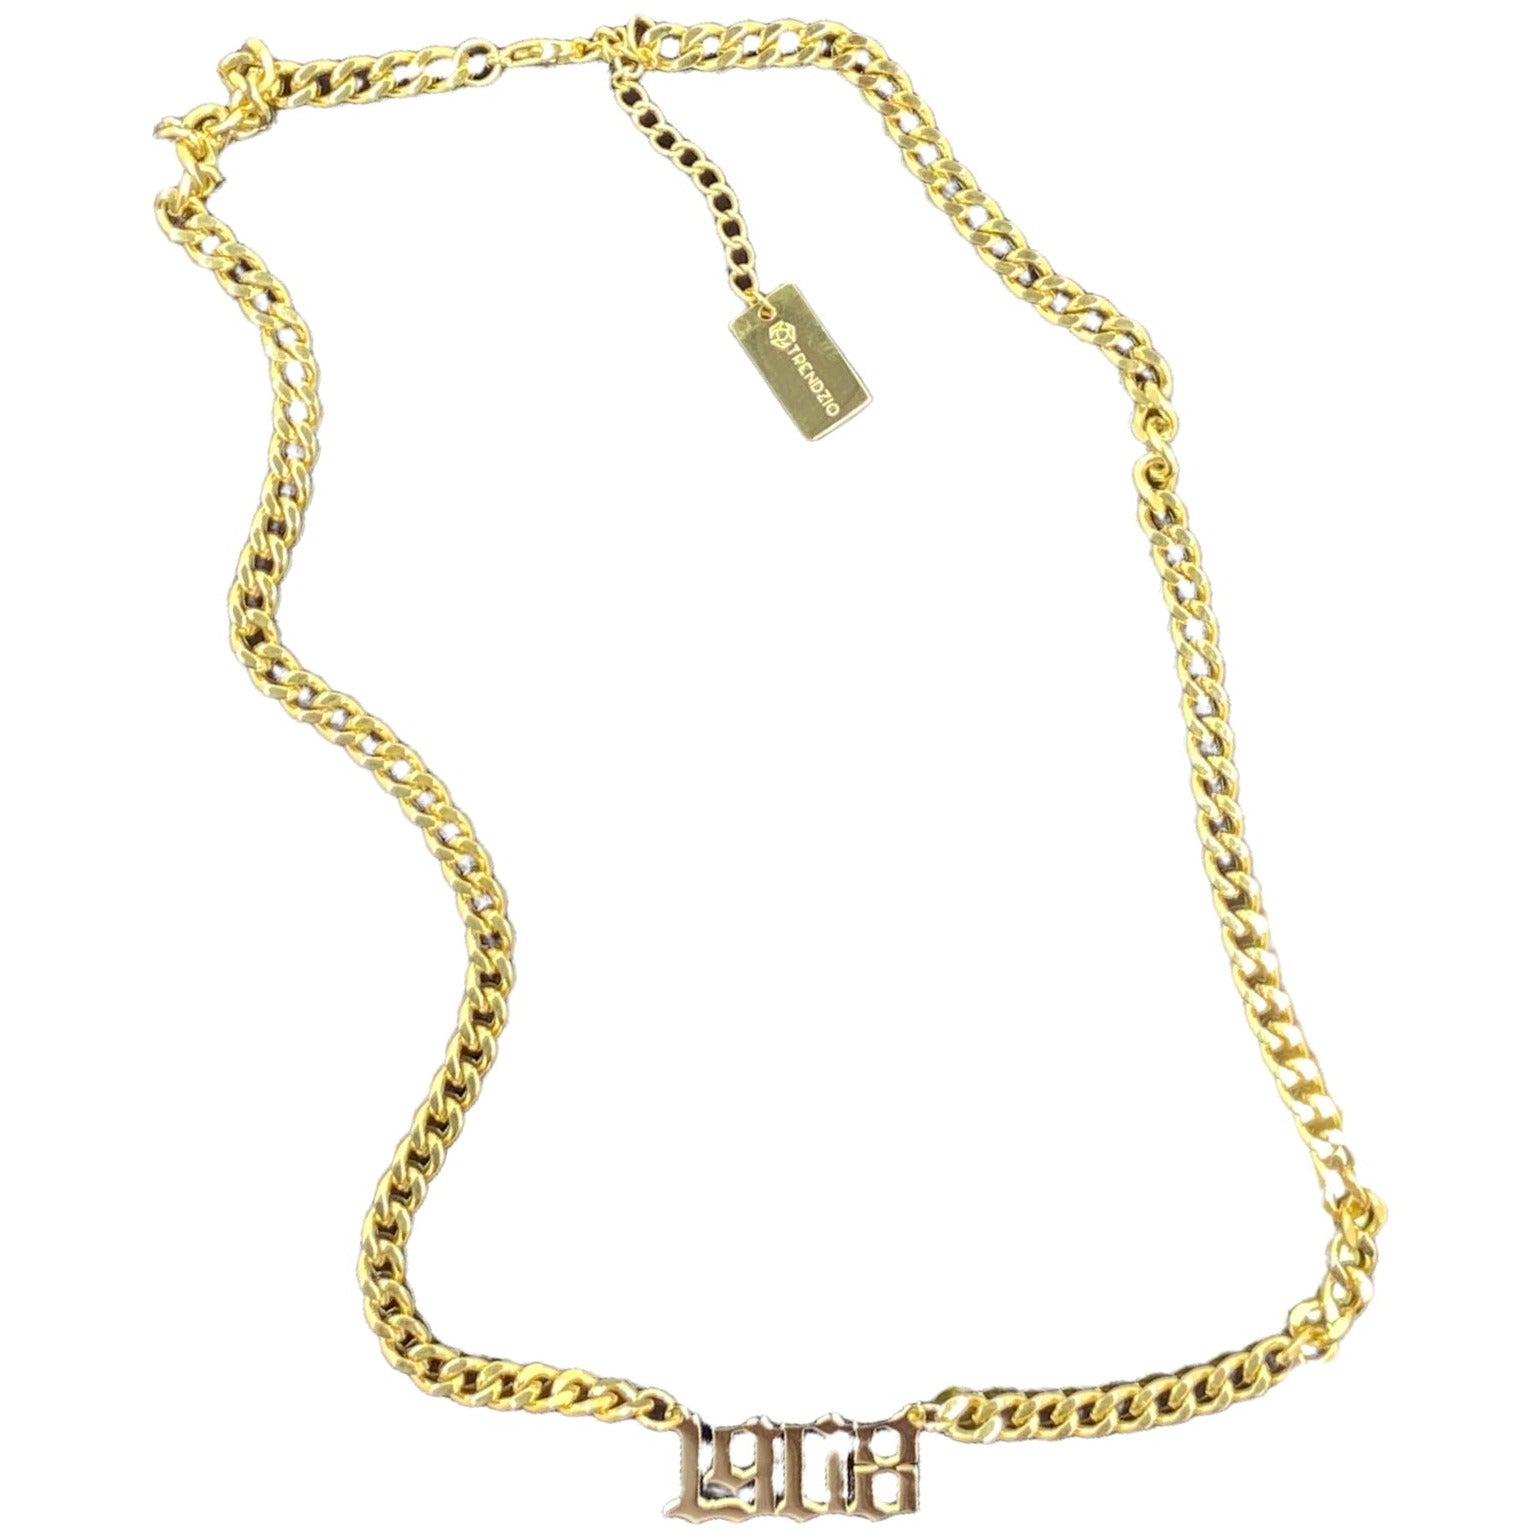 Trend Alert: Chunky Chains